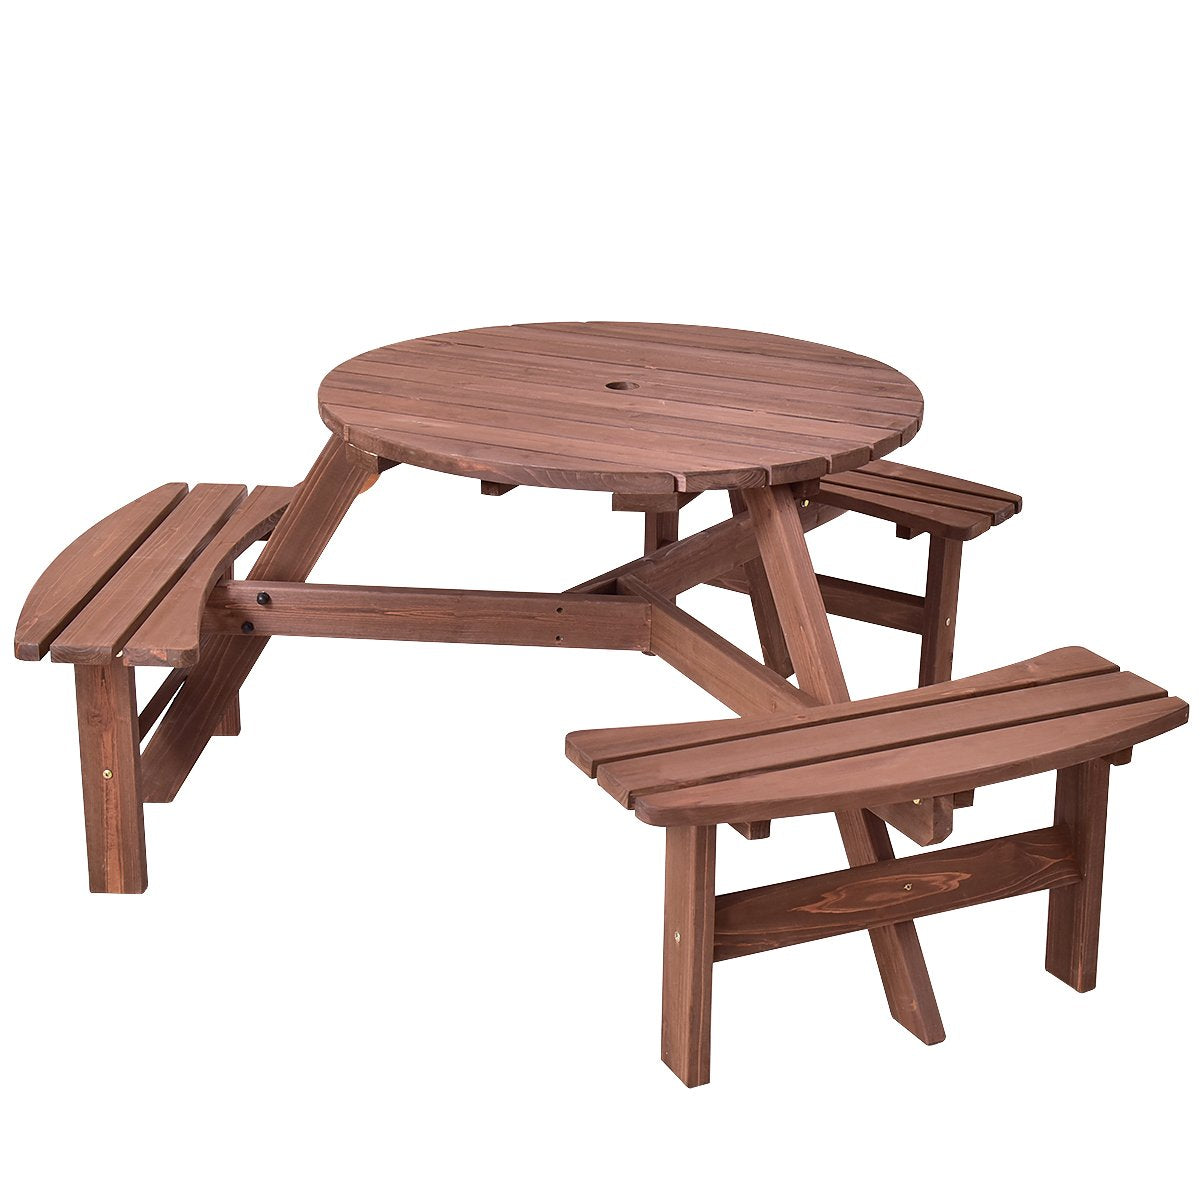 Giantex 6 Person Wooden Picnic Table Set with Wood Bench, Dark Brown